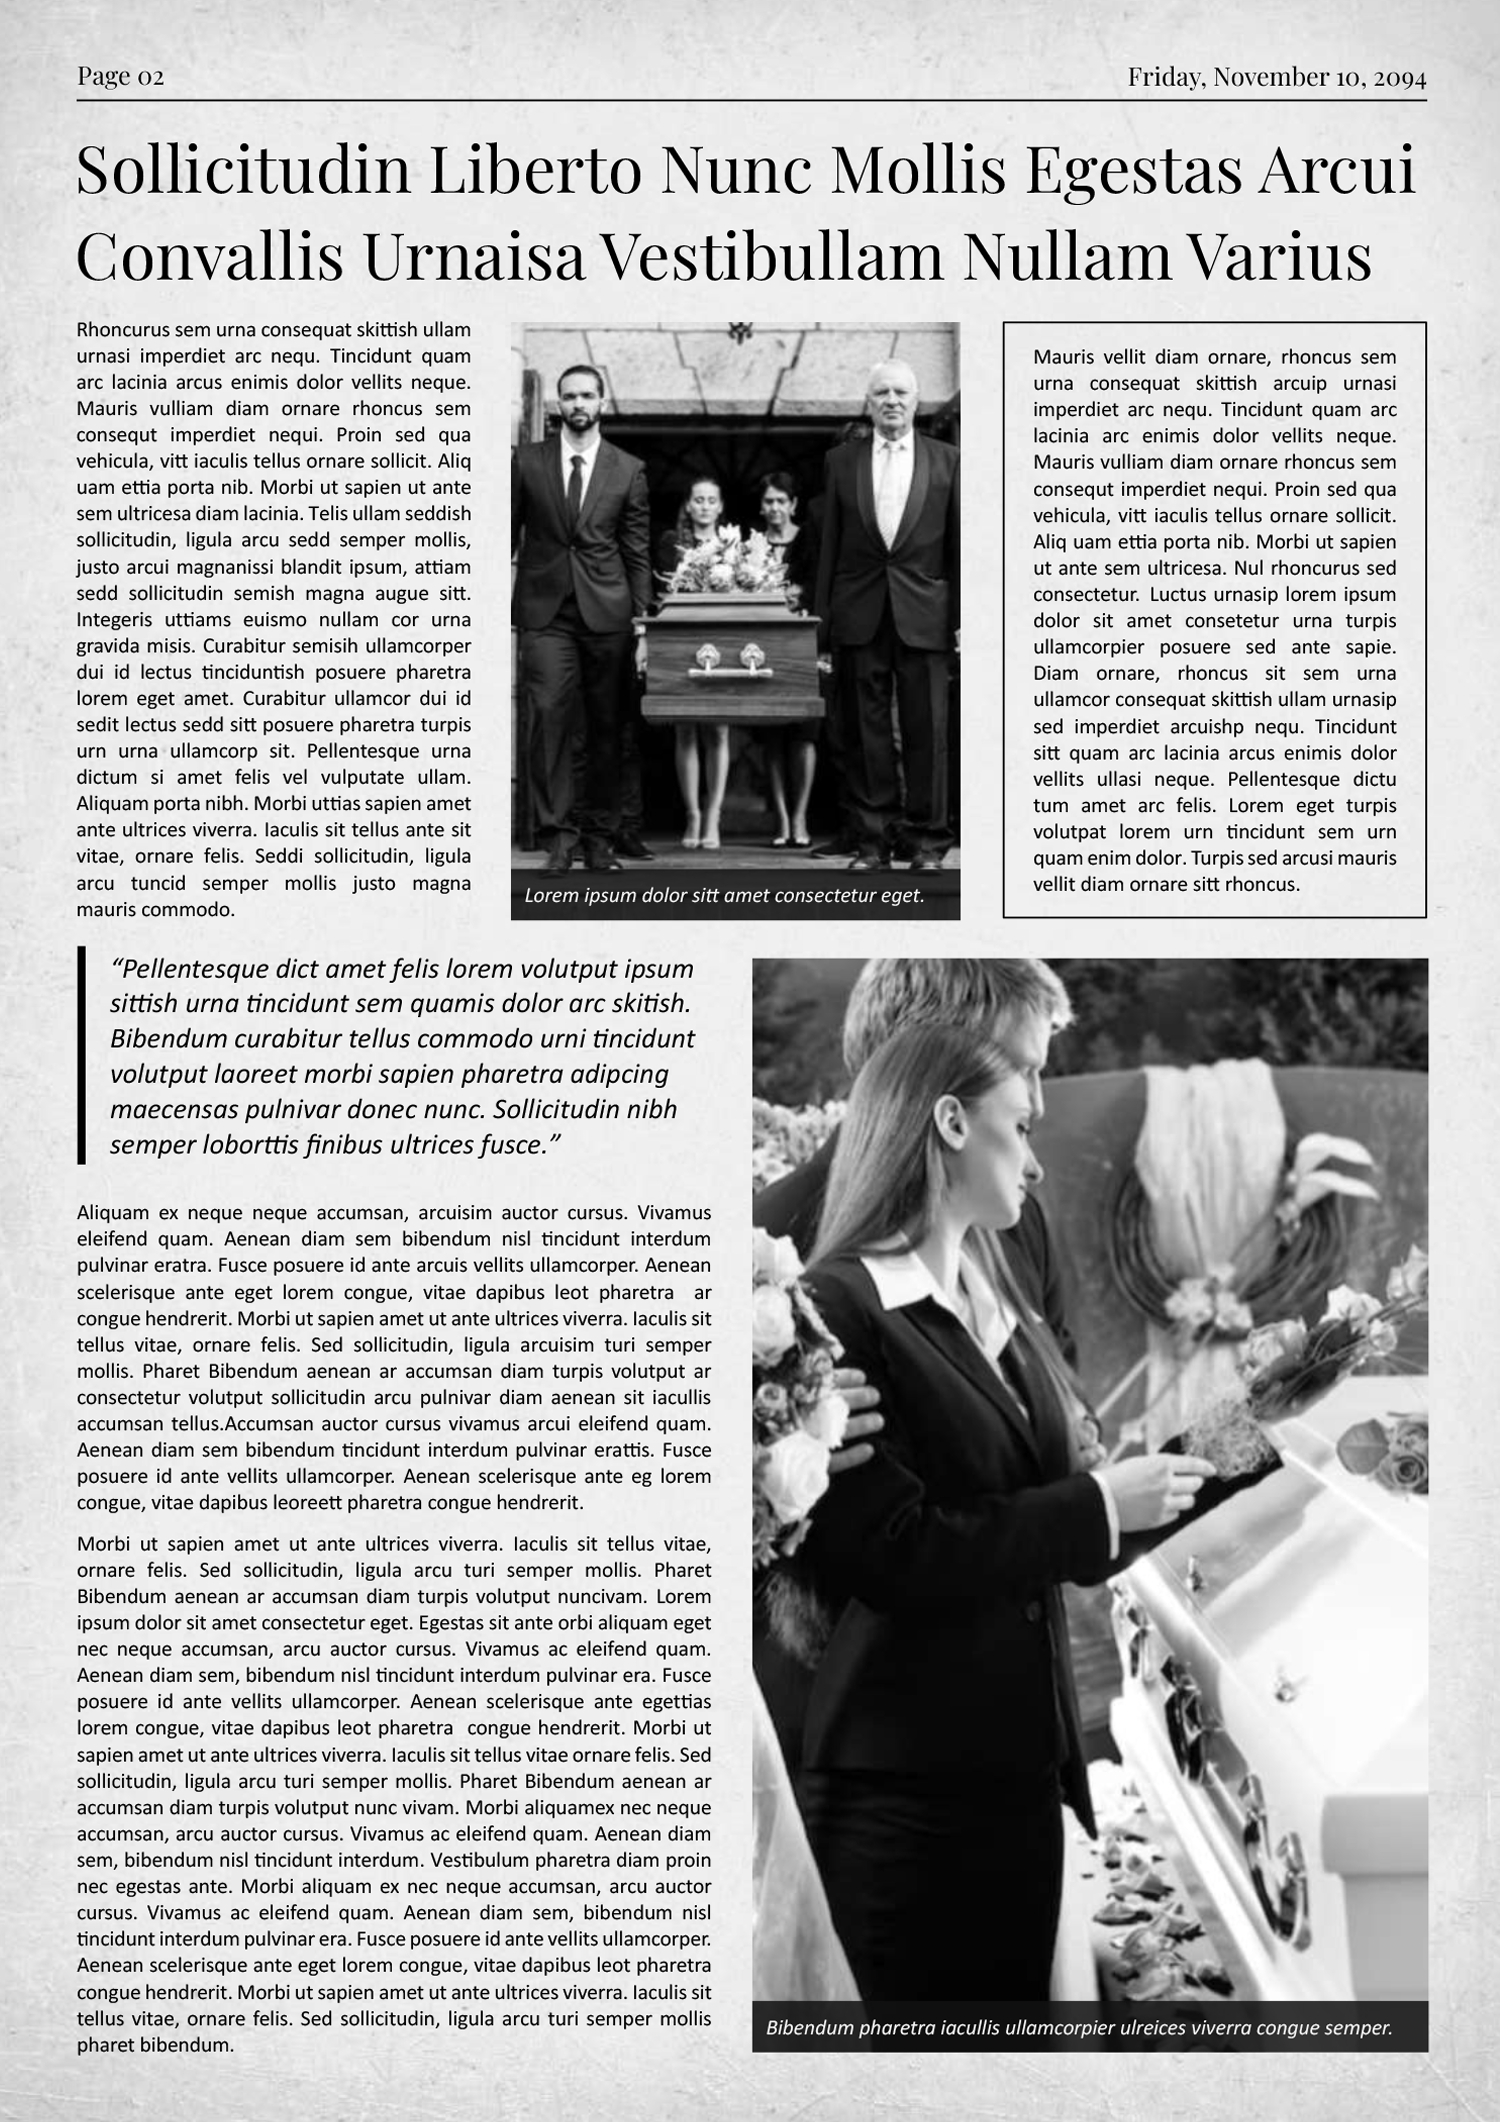 Old Style A3 Newspaper Obituary Template - Page 02